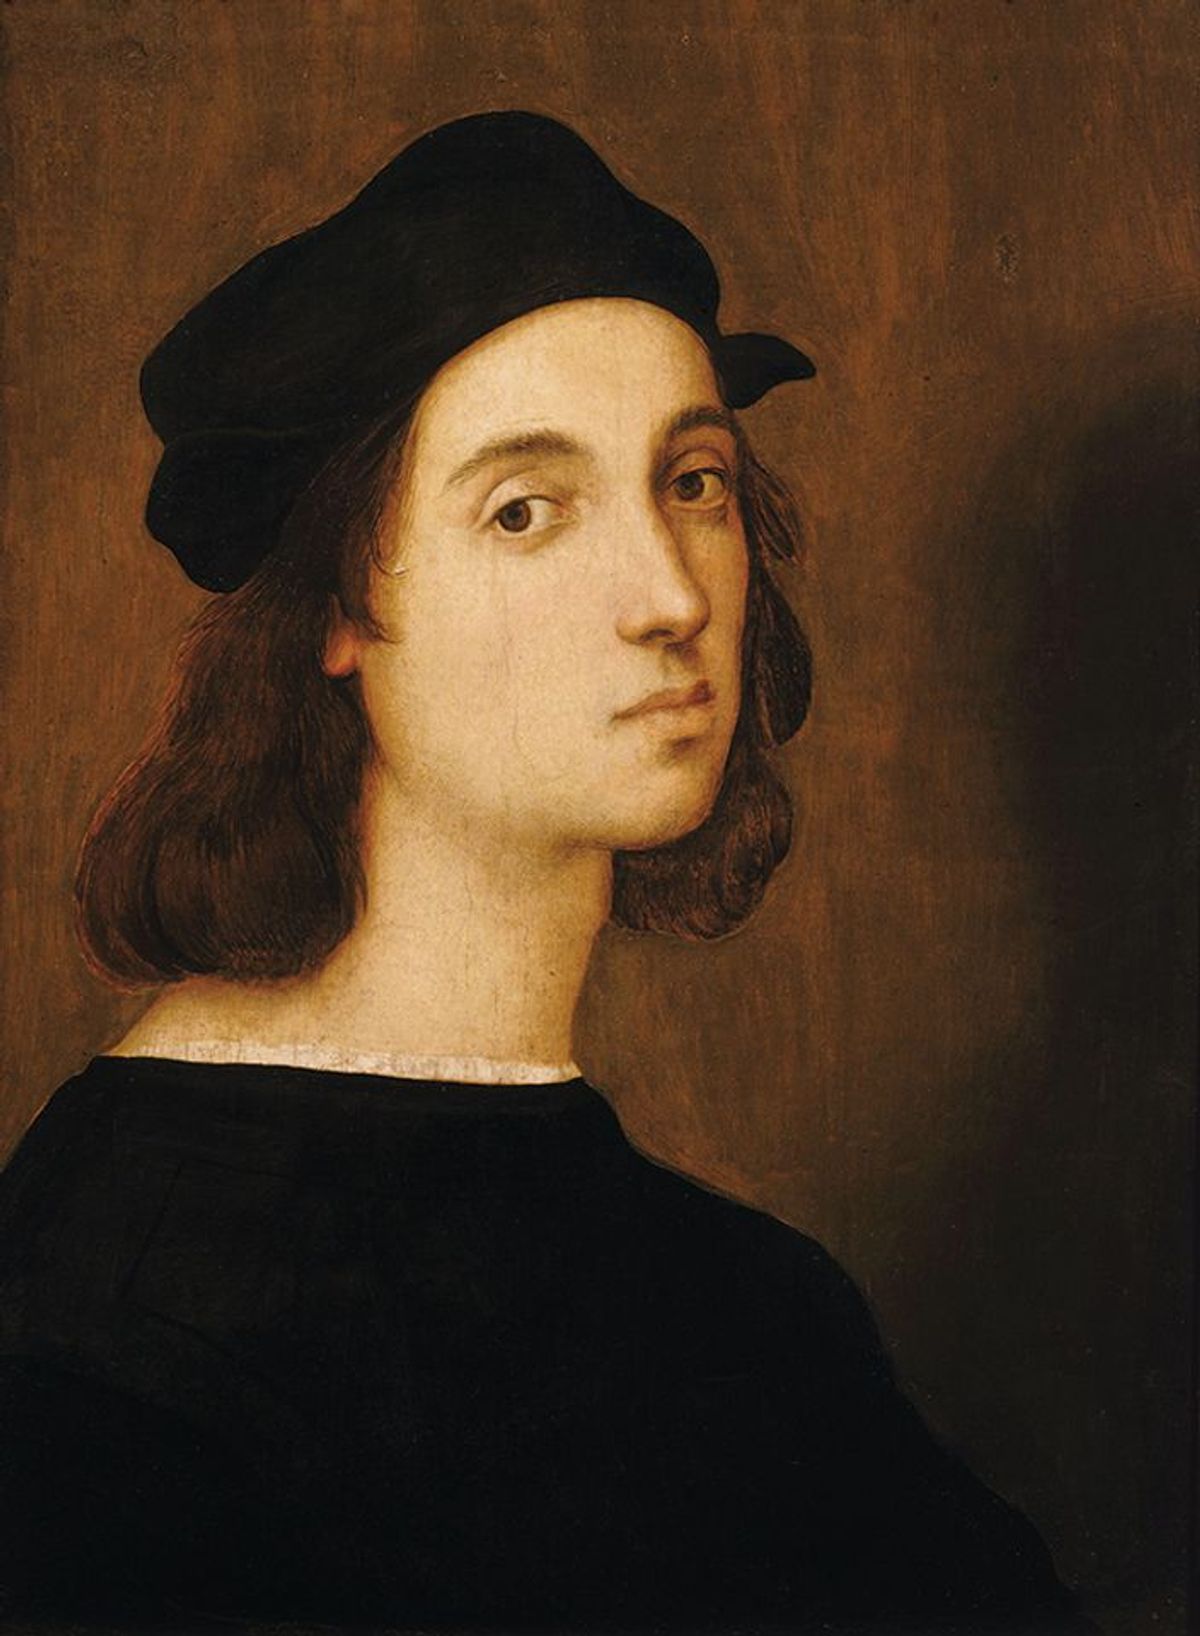 A self-portrait of Raphael in his 20s, painted between 1504 and 1506 © Gallerie Degli Uffizi